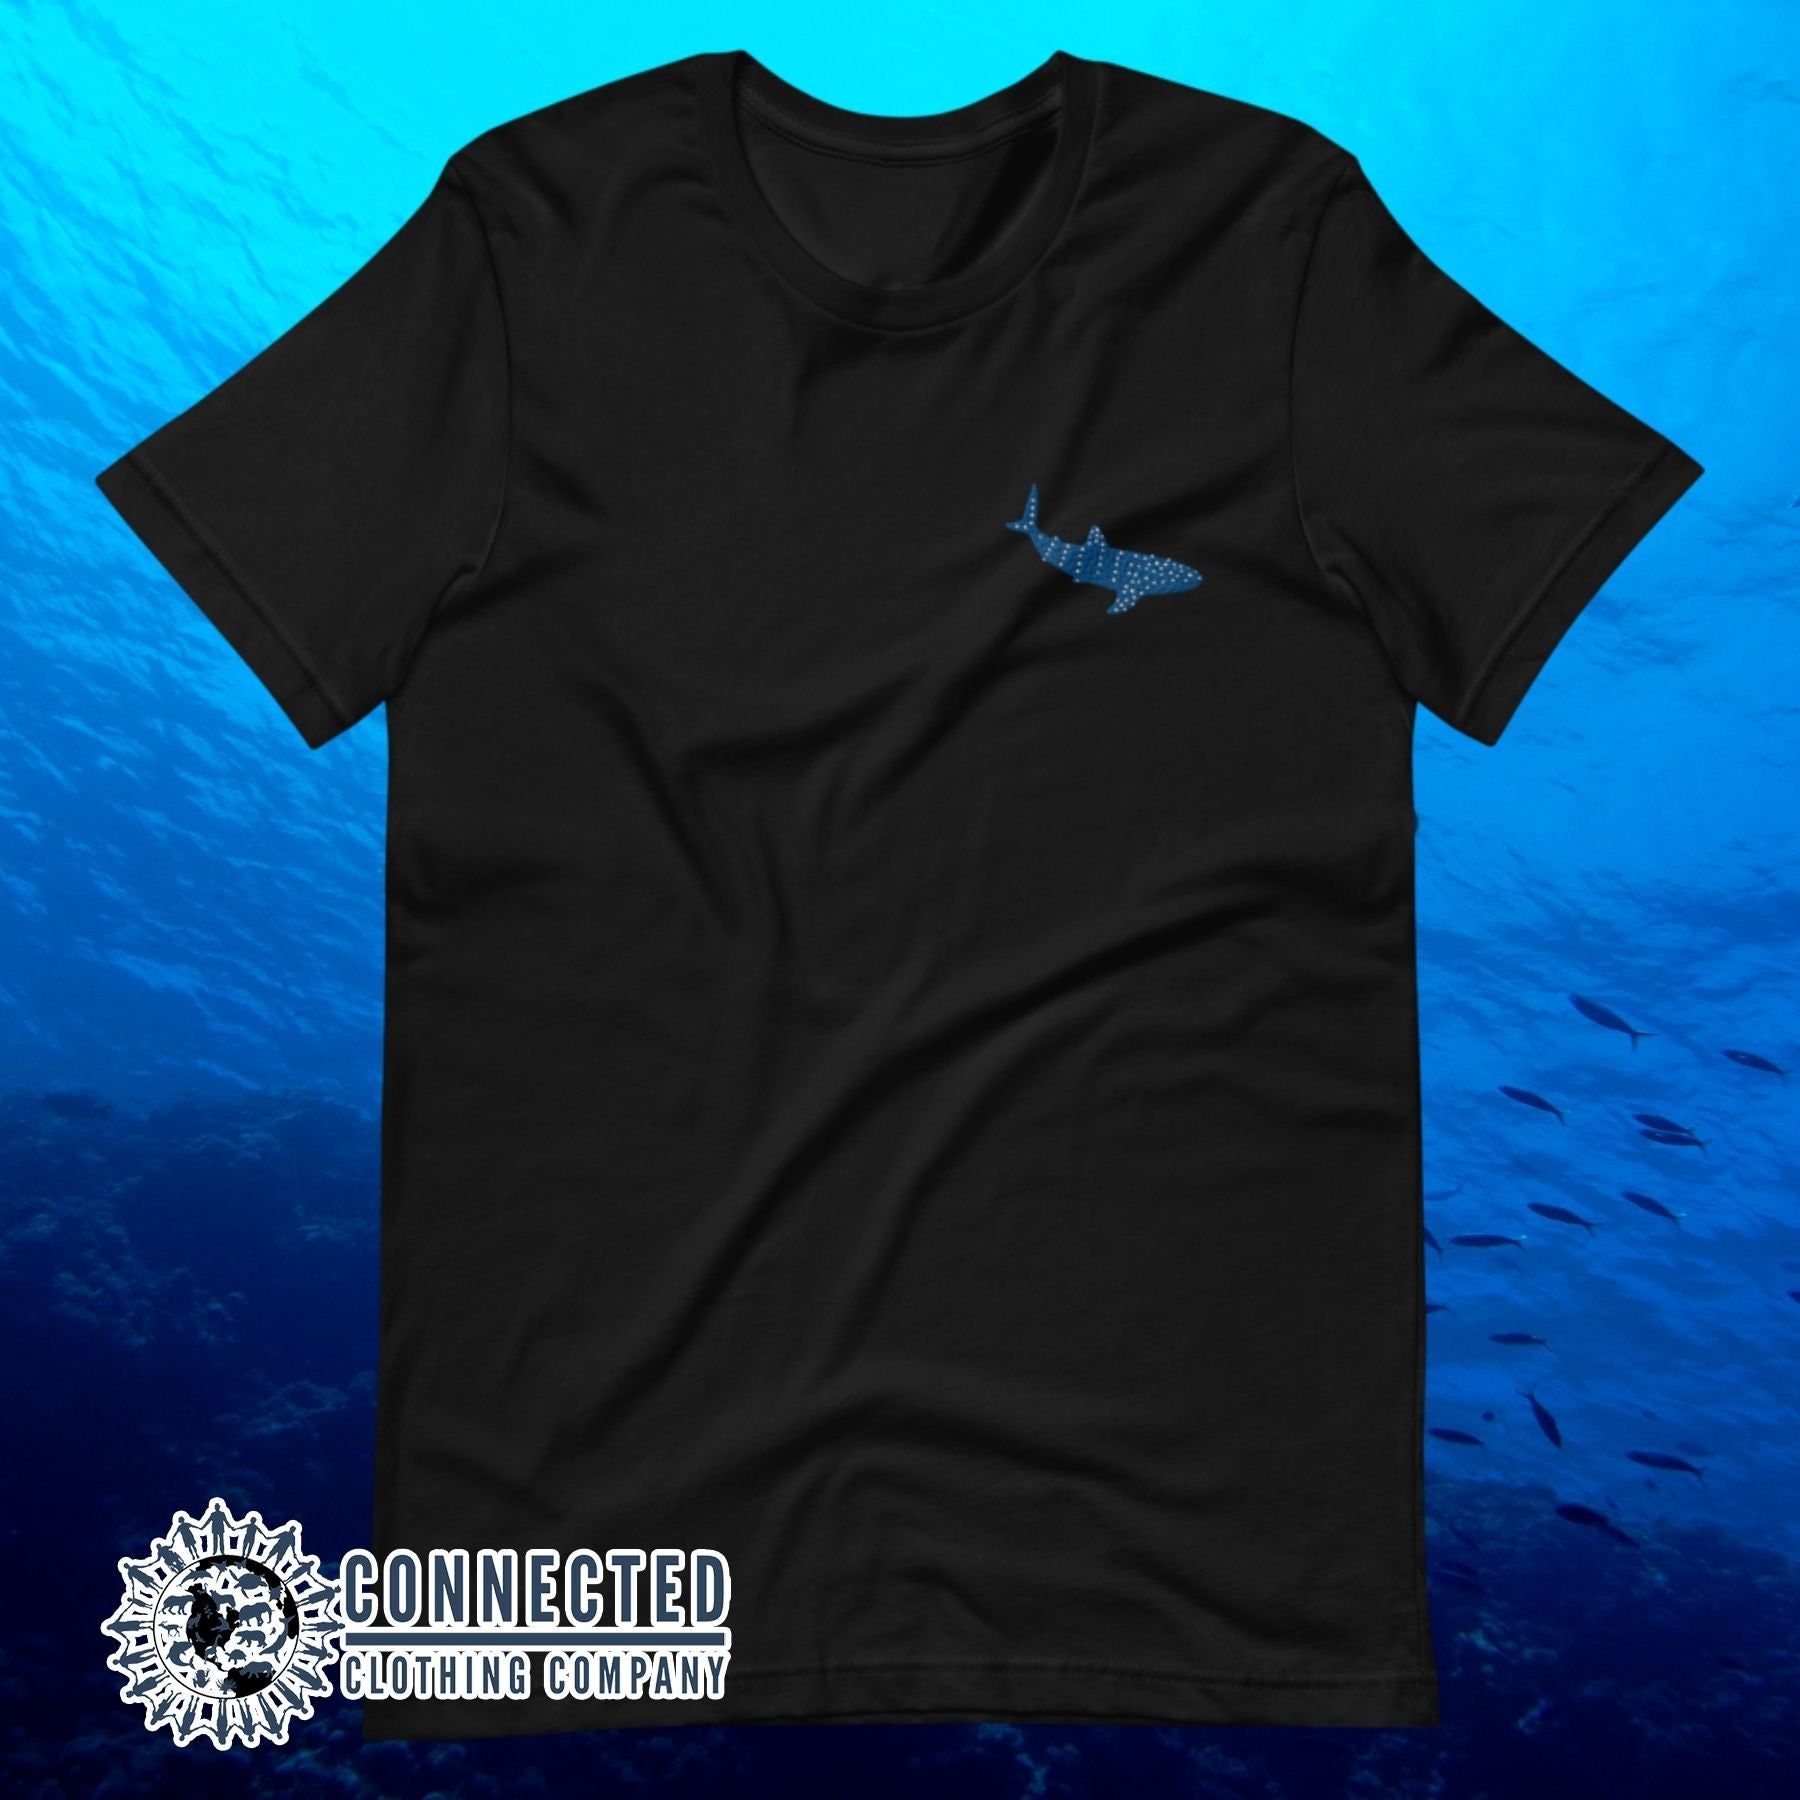 Black Embroidered Whale Shark Short-Sleeve Shirt - sweetsherriloudesigns - Ethically and Sustainably Made - 10% of profits donated to shark conservation and ocean conservation